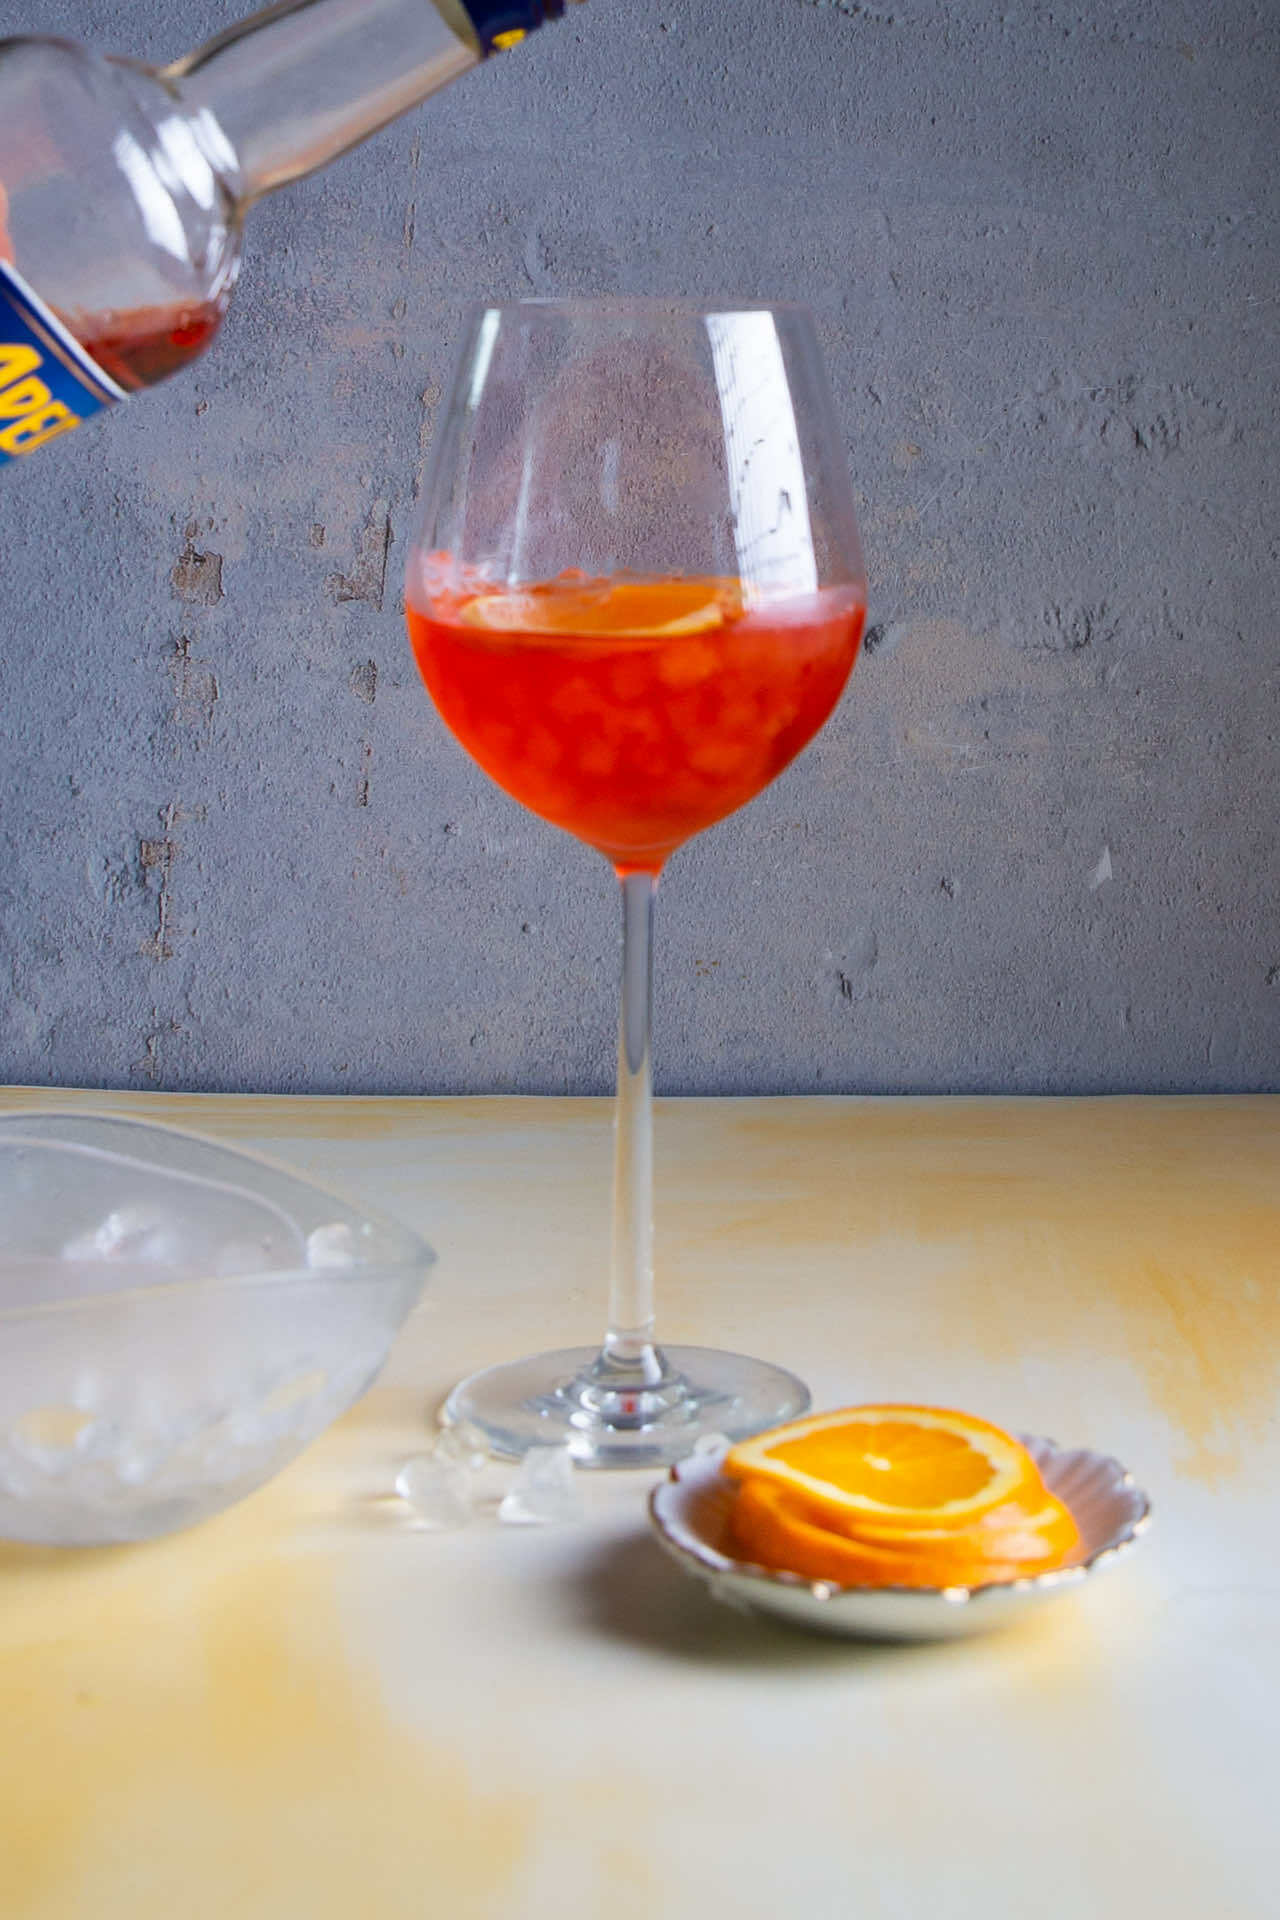 serving aperol to a glass